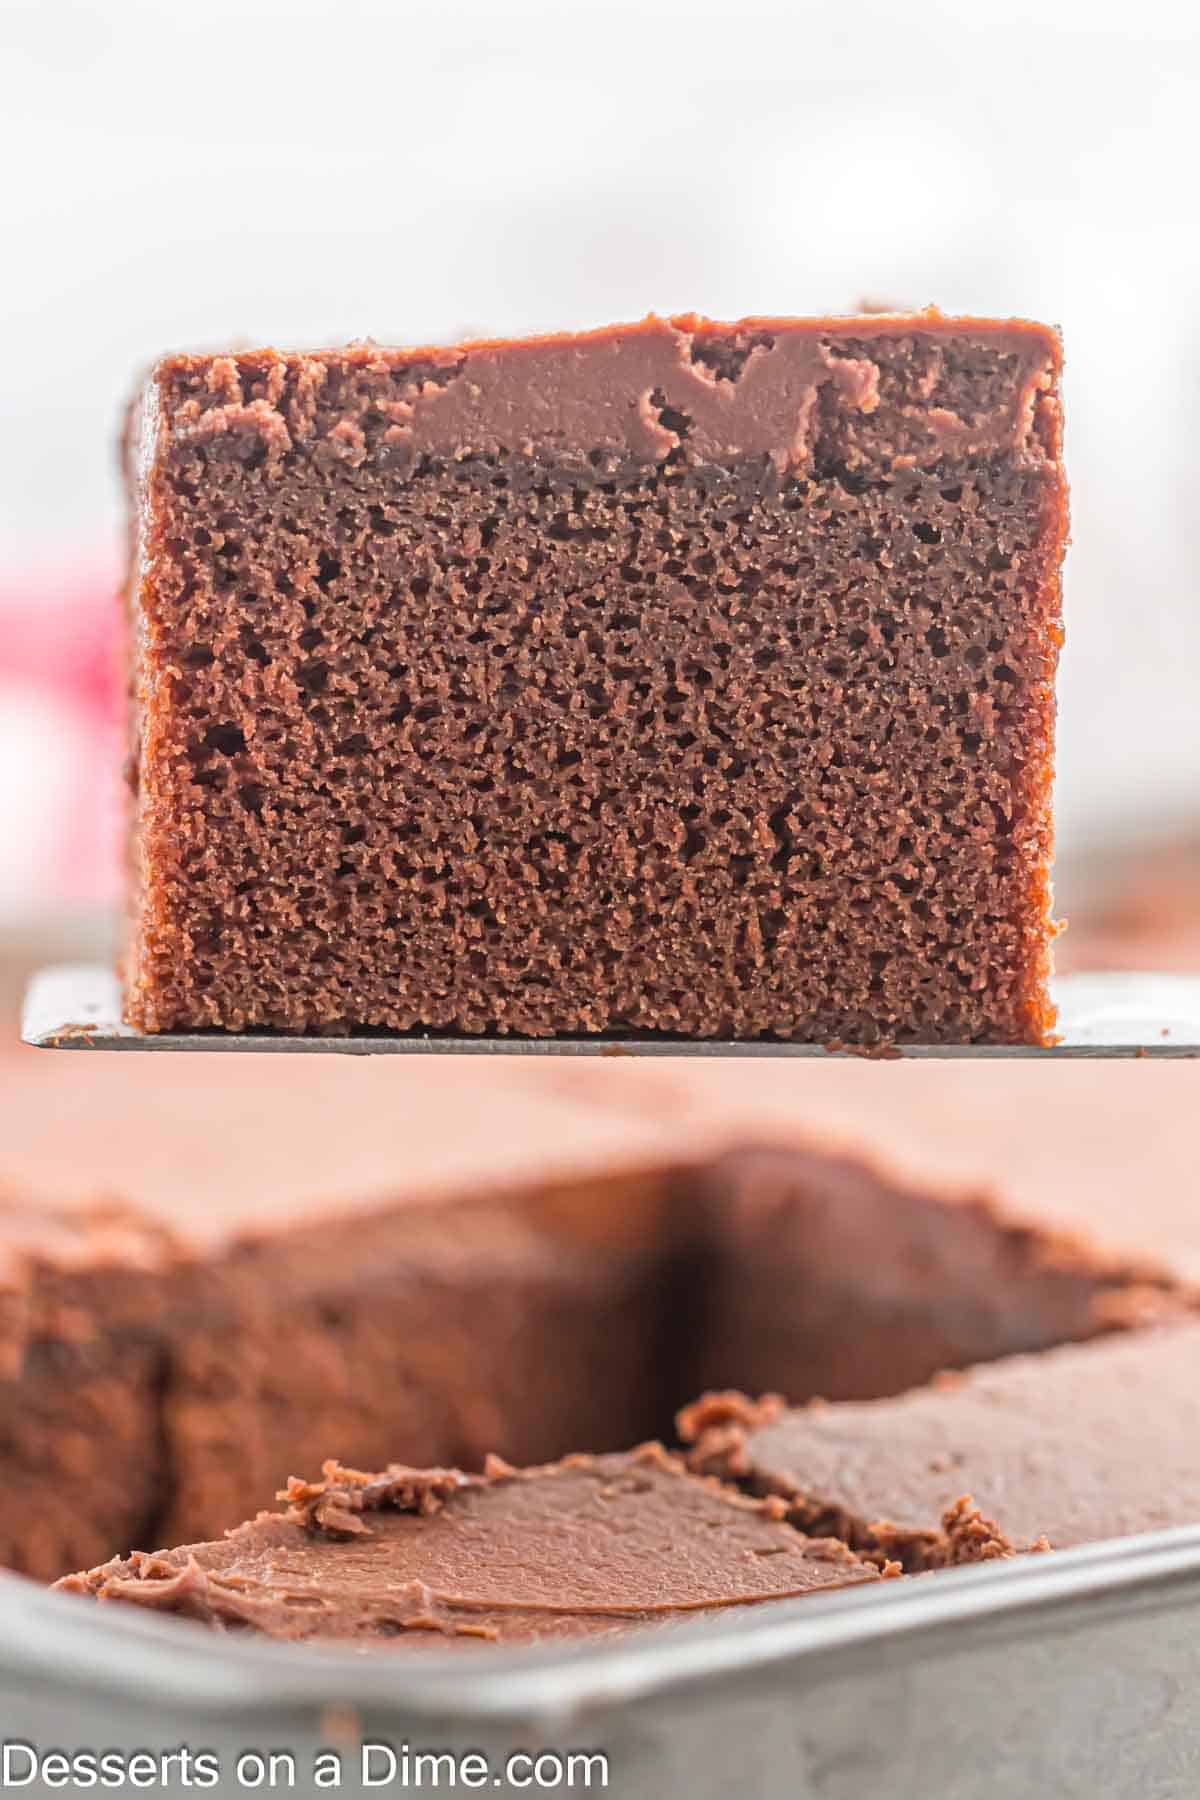 Chocolate cake in a baking dish with a slice of cake on a spatula